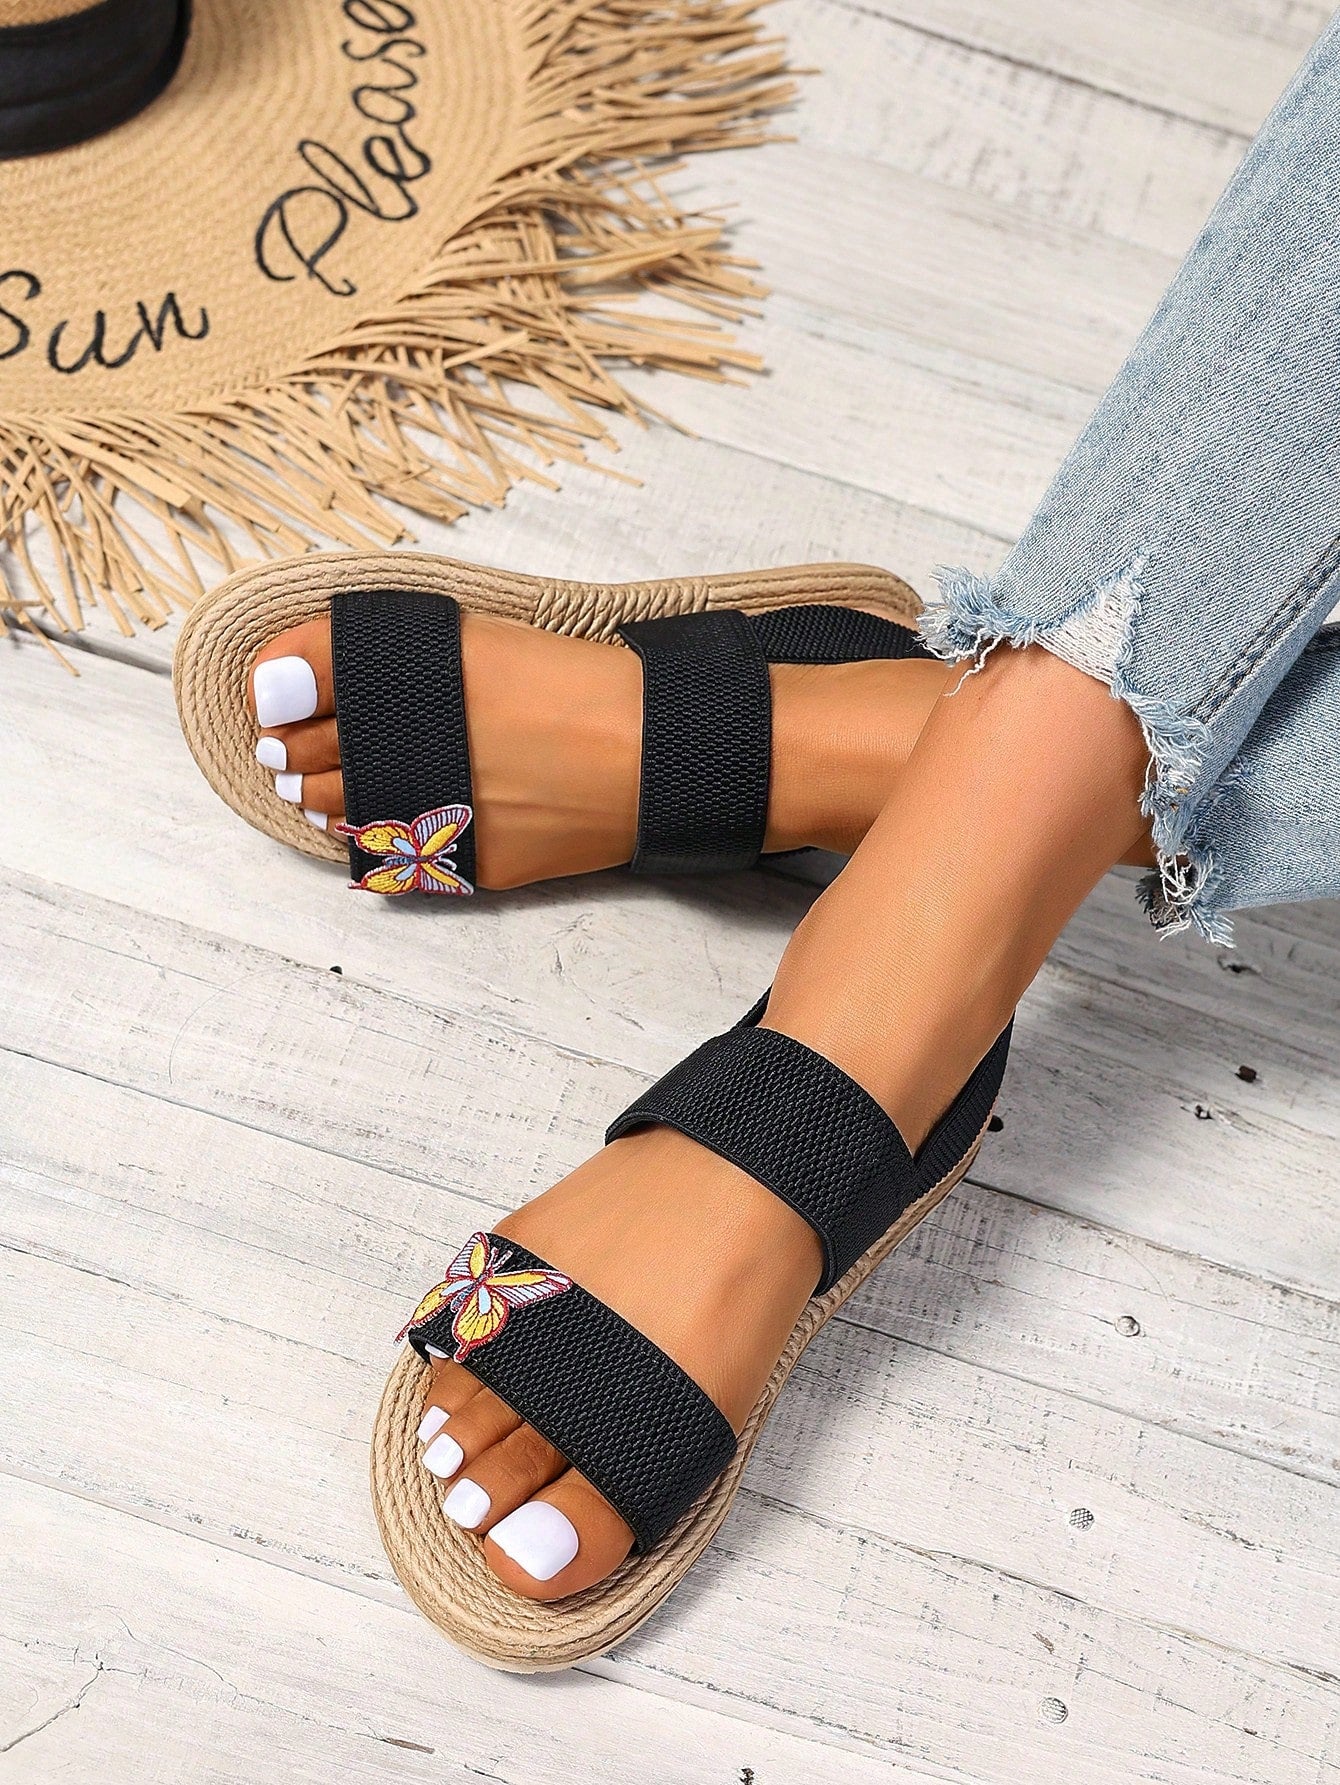 Women Summer Fashionable Simple Butterfly & Flowers Trendy Flat Sandals Black With Elastic Strap And Soft Sole Beach Hawaii Style Slippers-Black-2